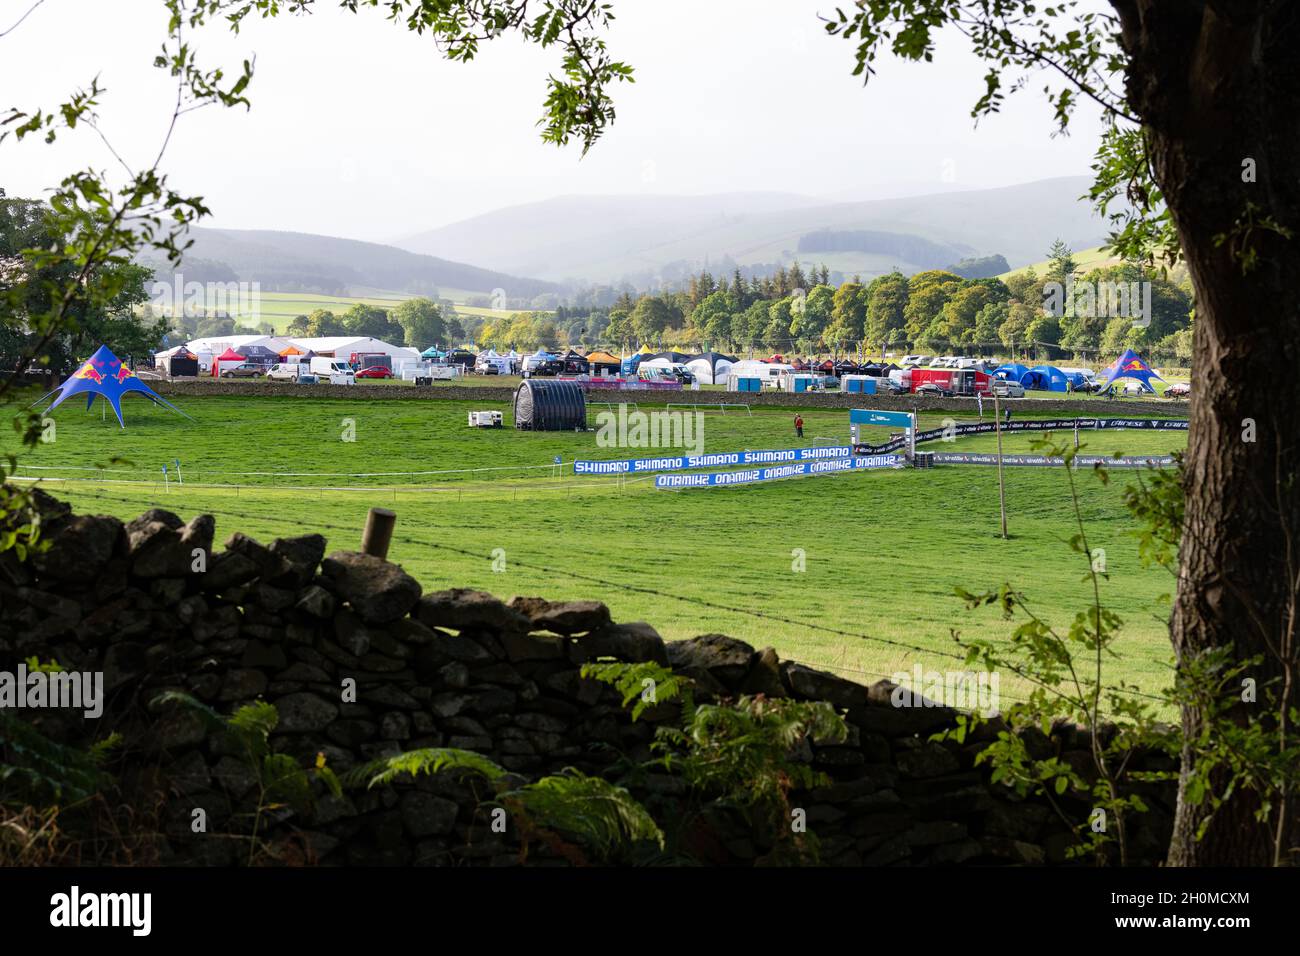 Festival Village and Race Paddock (prior to racing) for the Enduro World Series and Tweed Valley festival, Innerleithen, Scotland, UK Stock Photo